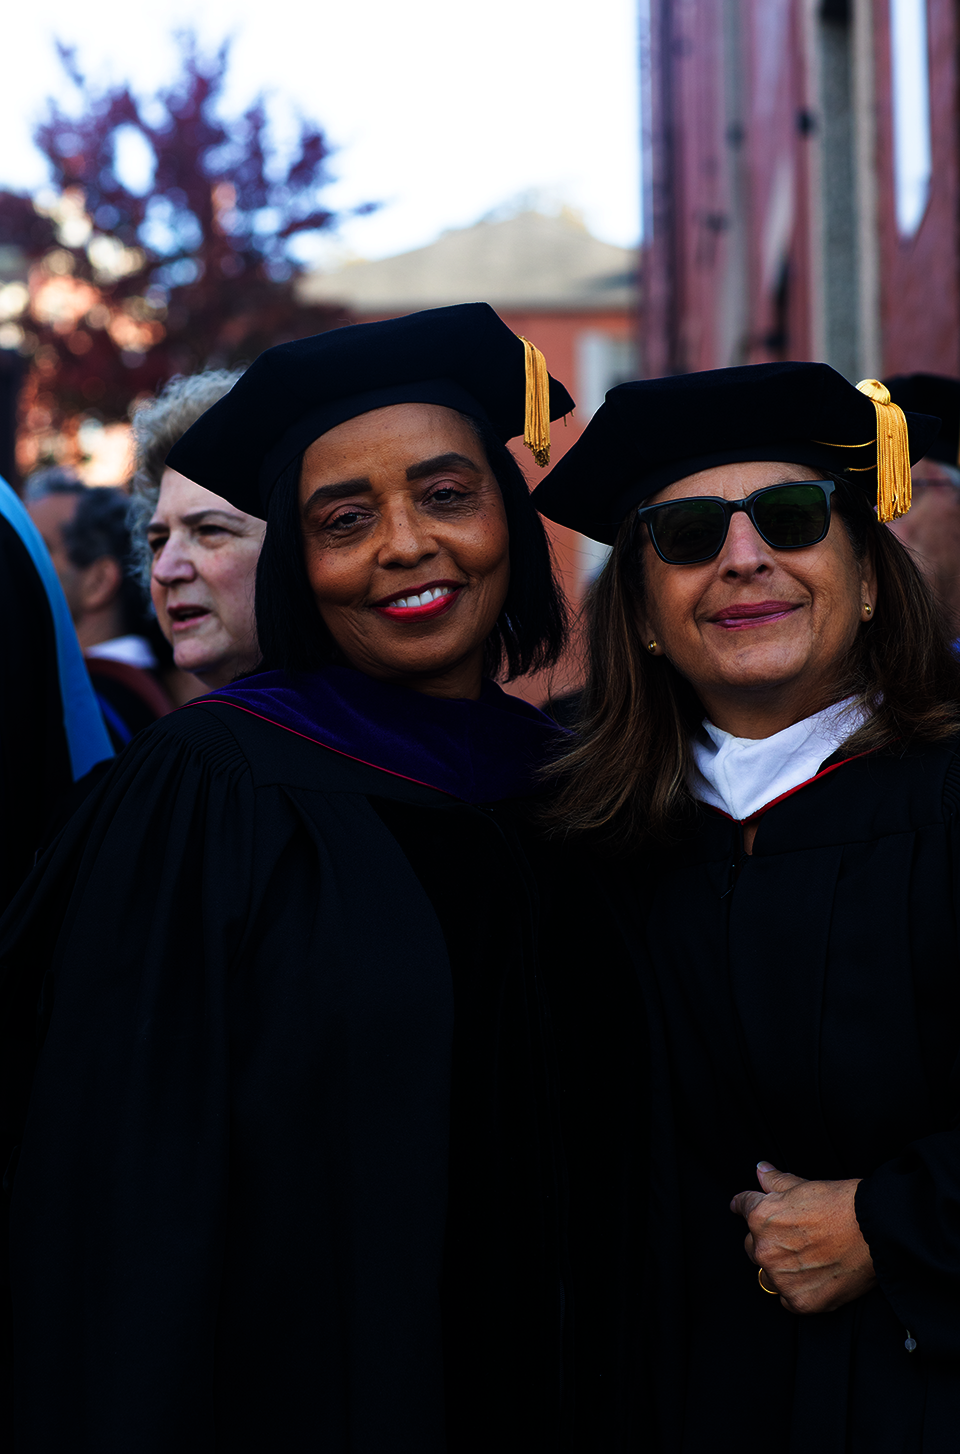 A Black woman and a white woman in sunglasses stand in doctoral robes, smiling.